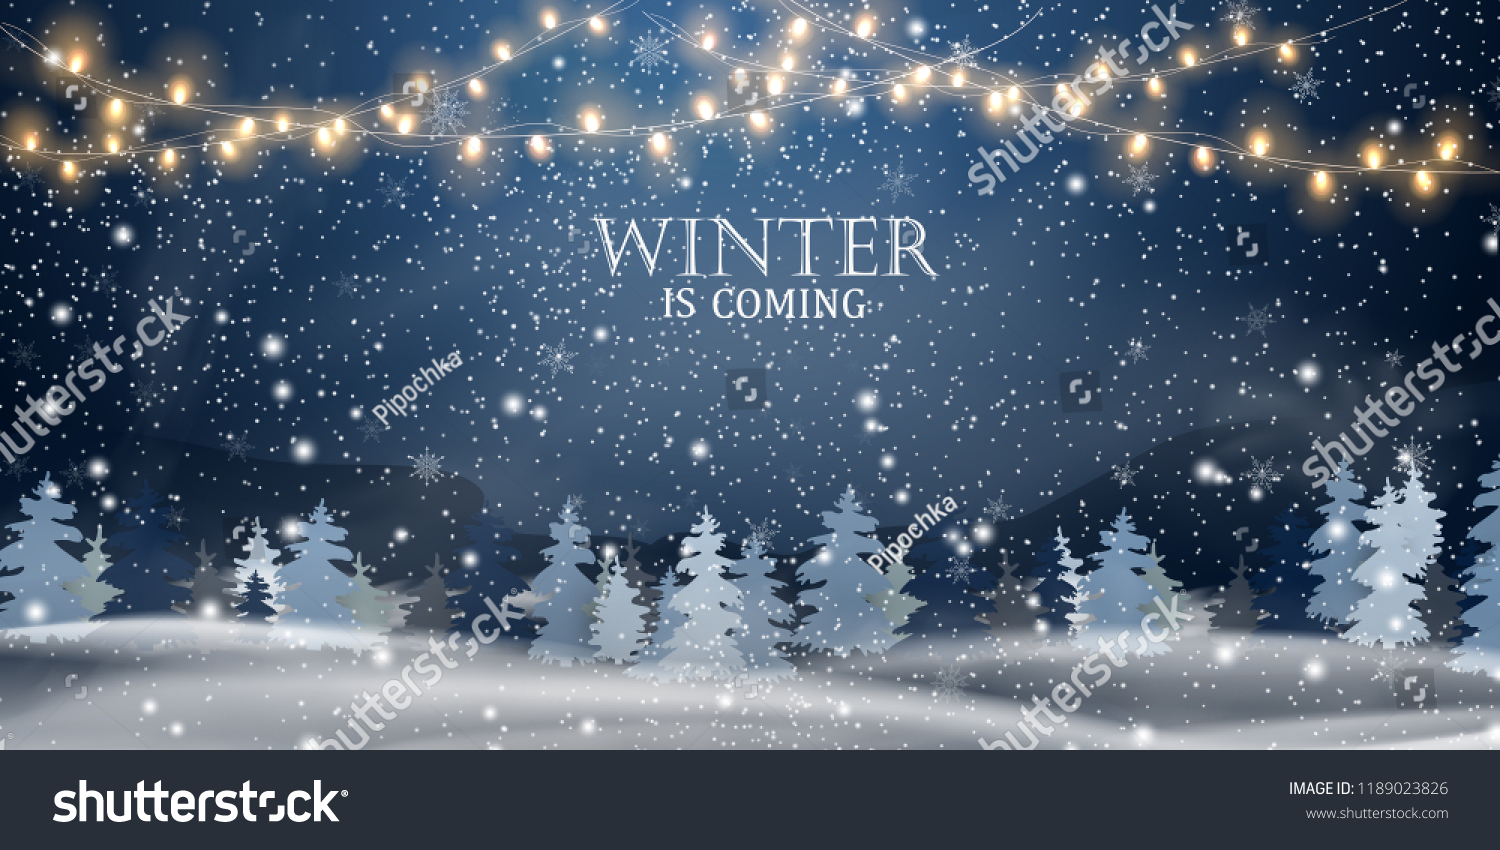  Winter is coming. Snowy night with firs, coniferous forest, light garlands, falling snow, Woodland landscape for winter and new year holidays. Holiday winter landscape. Christmas vector background. #1189023826